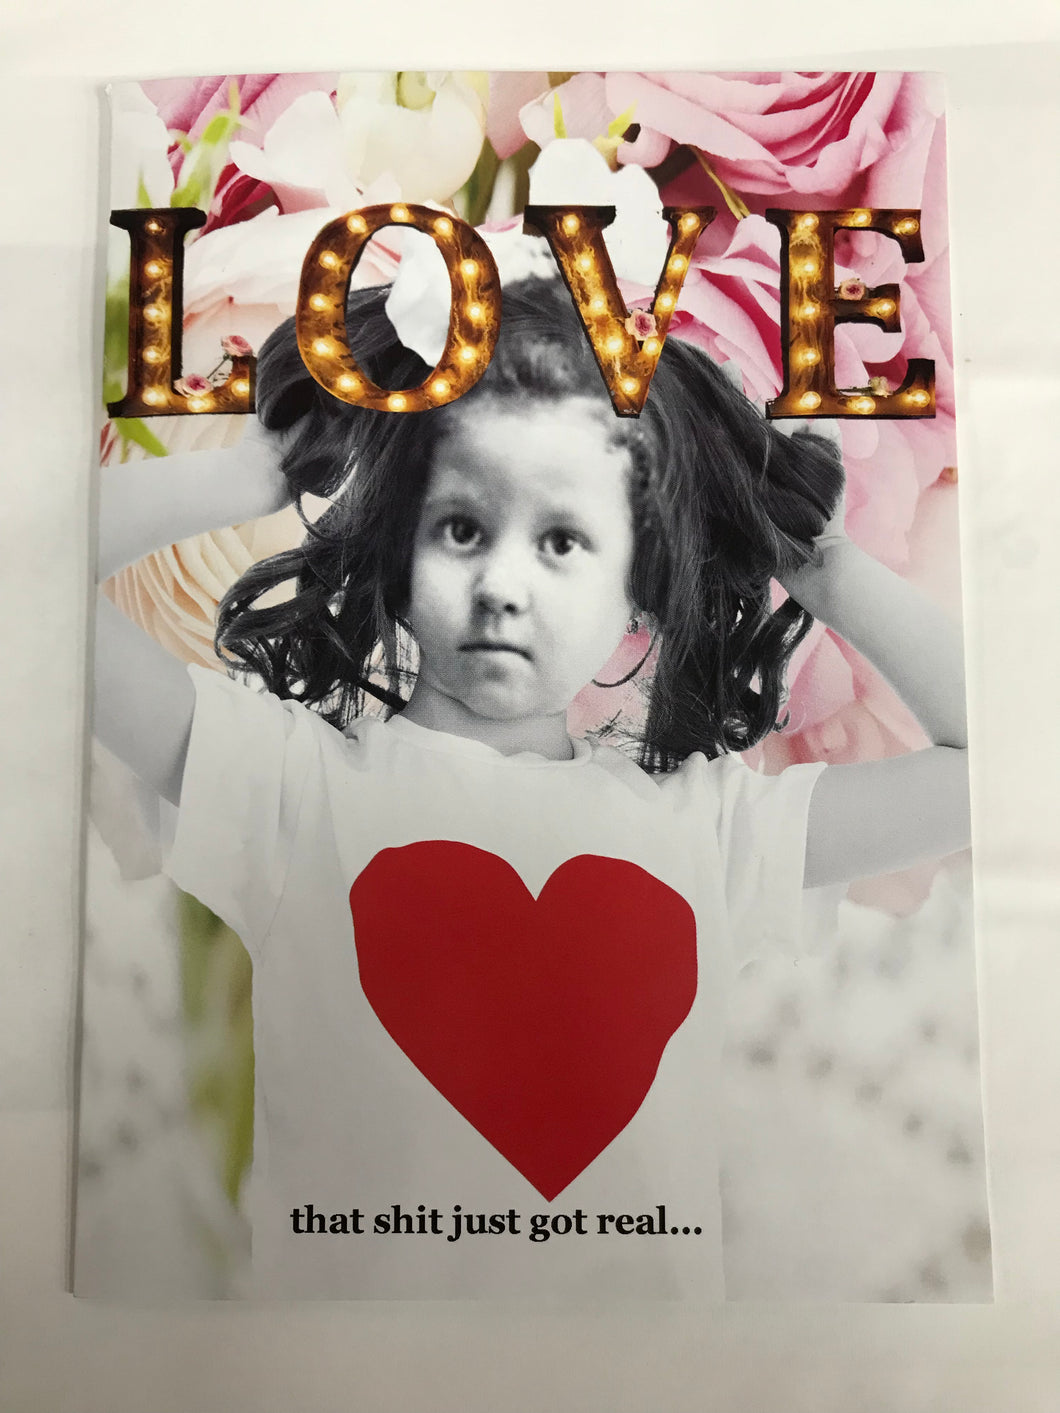 ' LOVE   that sh't just got real... '   Greeting Card by Erin Smith